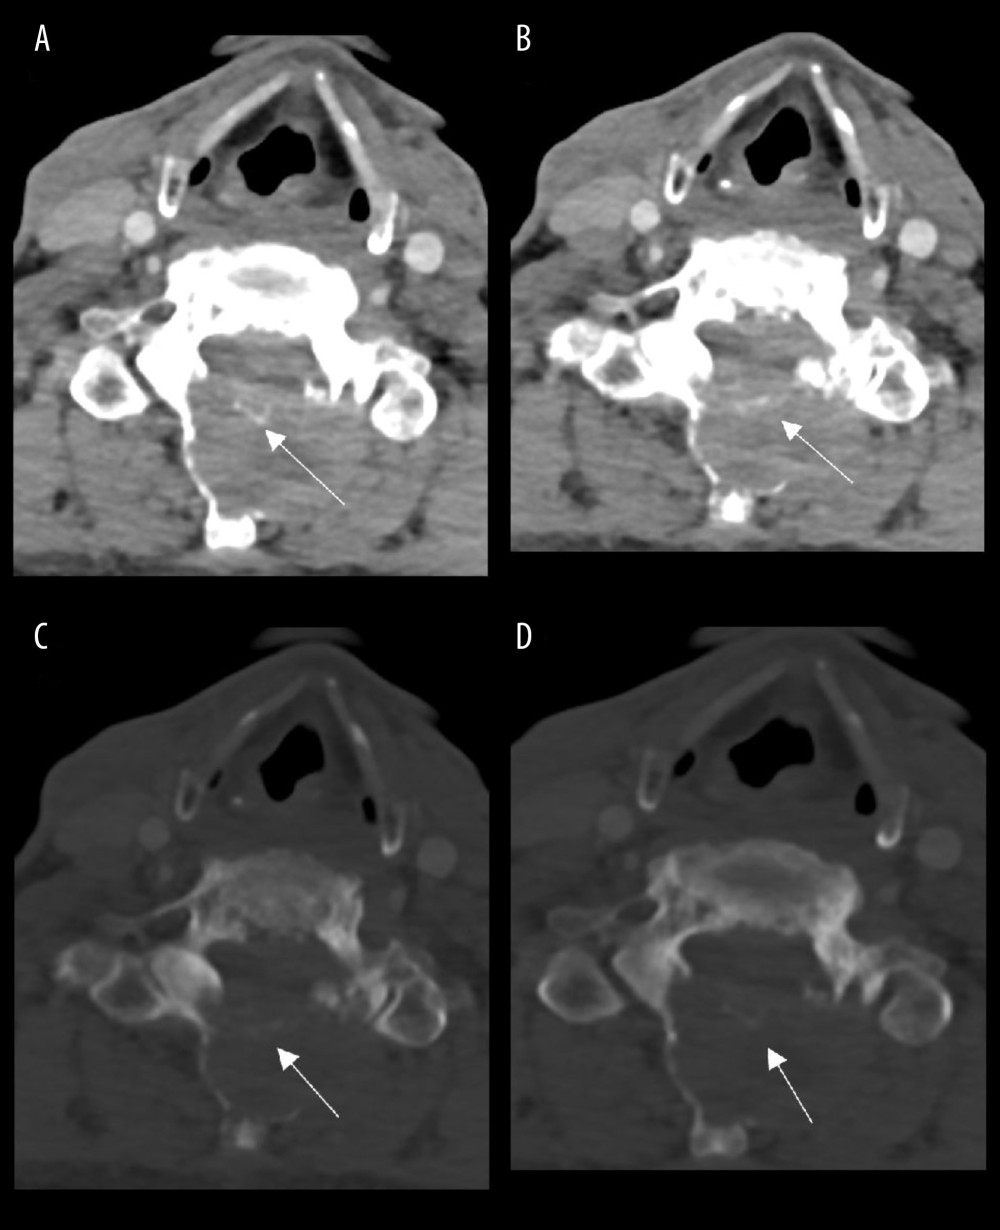 Contrast tomographic (CT) scans of the neck of the 82-year-old man. (A, B) Axial CT scans of the soft tissues and (C, D) bone window across C6 vertebra showing an expansile posterior epidural soft-tissue mass causing marked bony erosion of the laminae, facets, and spinous process. There are also faint hyperdensities in the posterior C6 level within the mass (arrows), indicating intratumoral calcification (arrows).